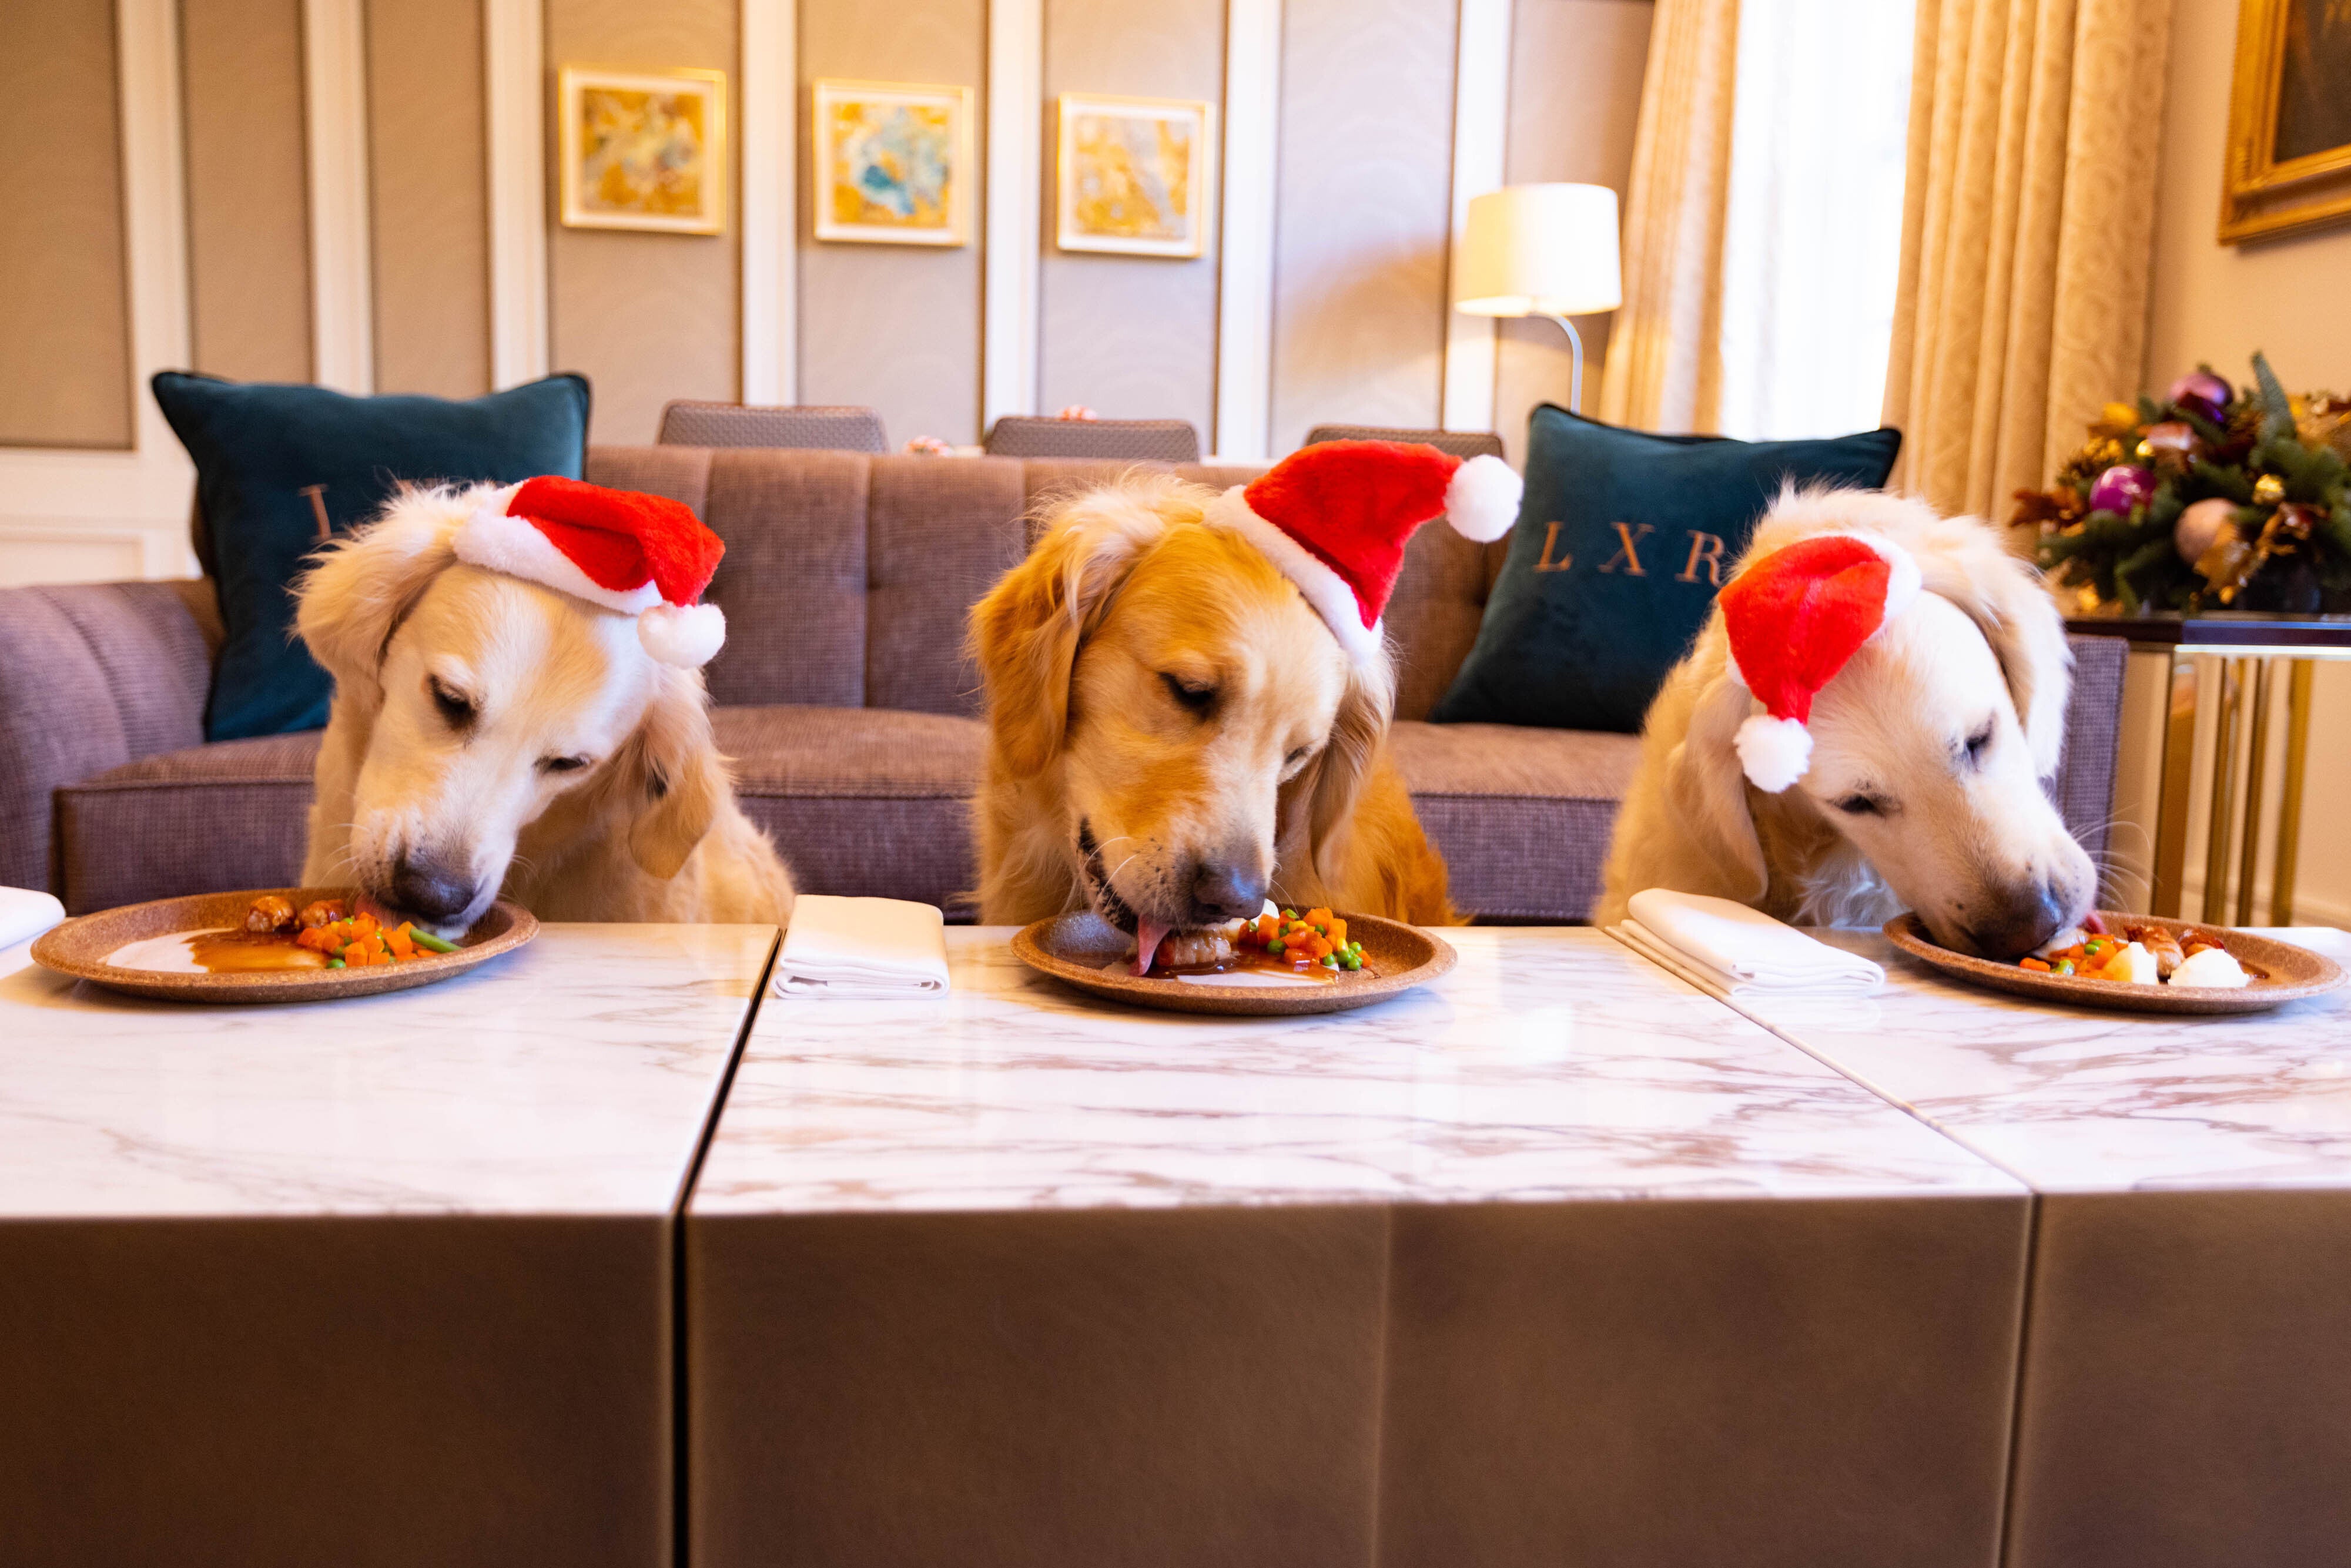 Golden Retrievers Darcy, Boris and Lily sample Hilton’s new festive menu for dogs, at The Biltmore Mayfair in London (David Parry/PA)